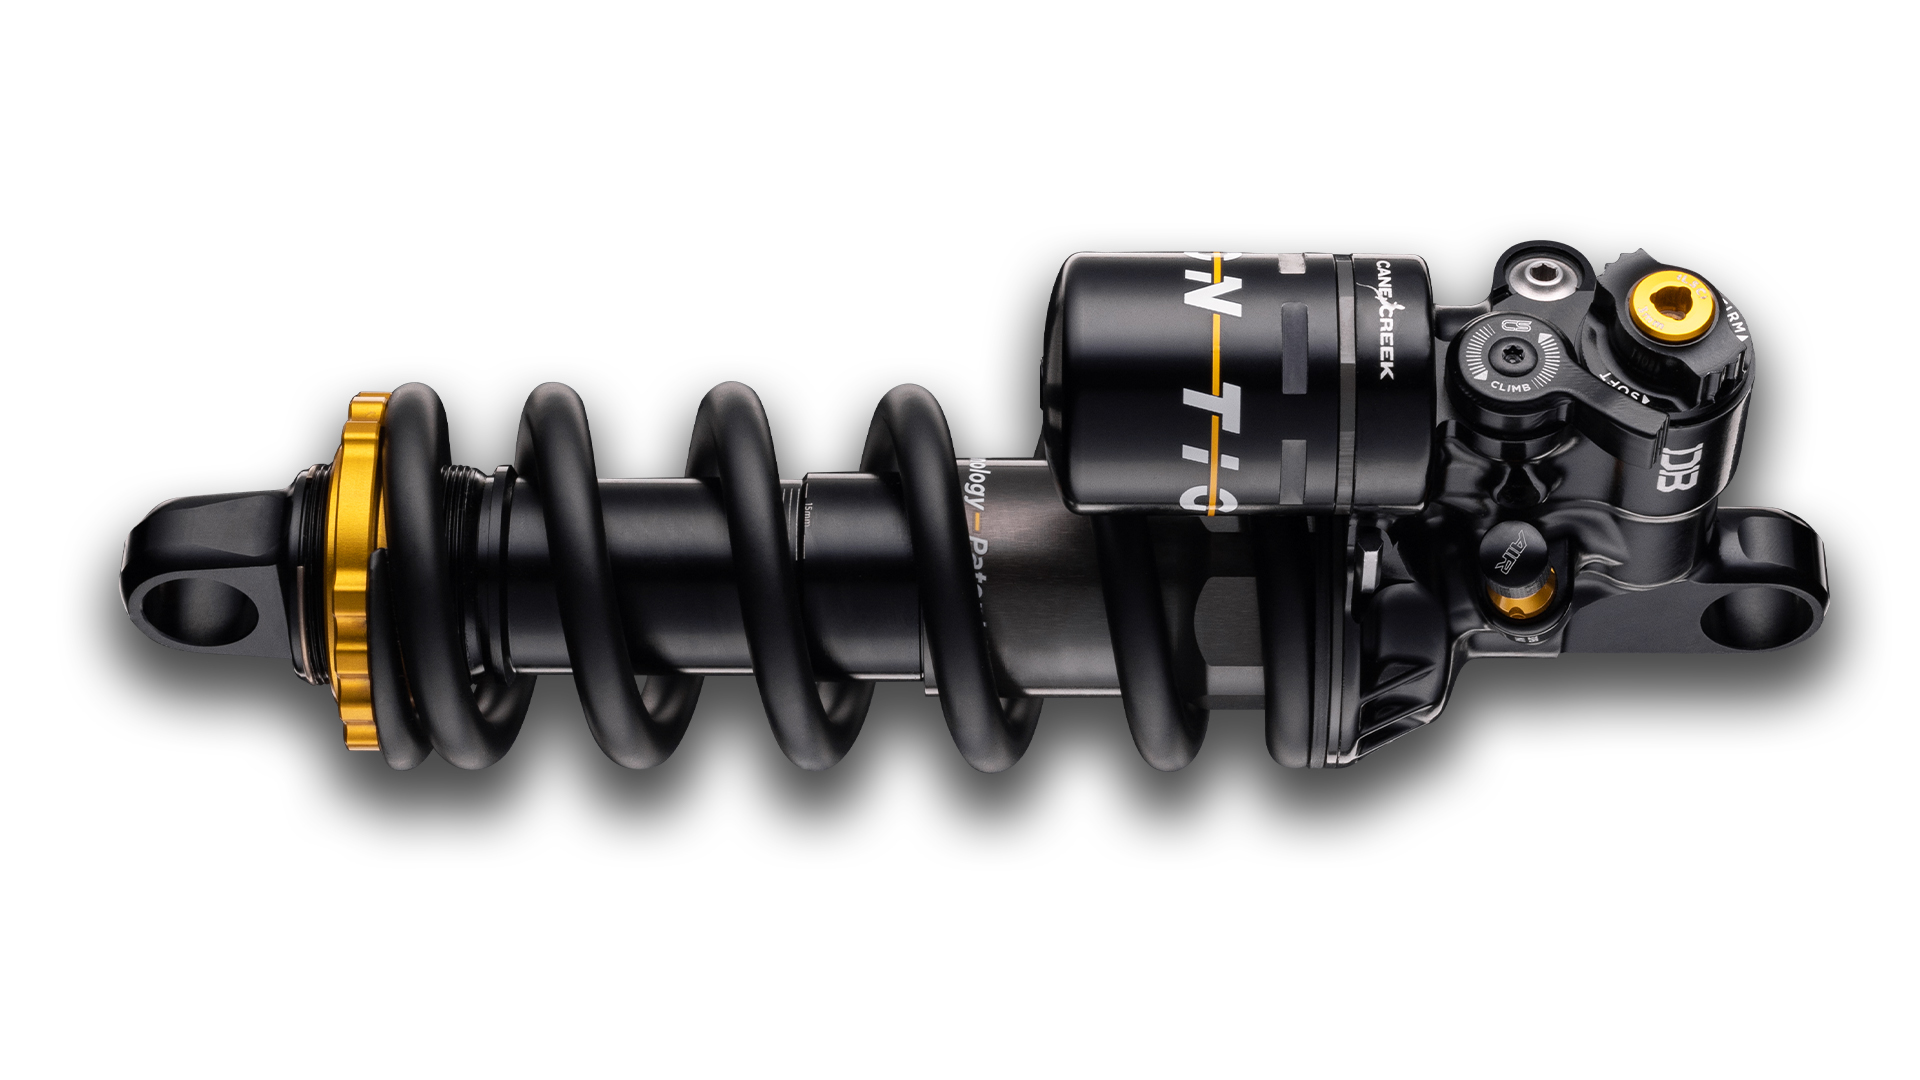 Cane Creek Introduces The Air-Charged Coil Shock, Tigon – Mountain Bike Press Release